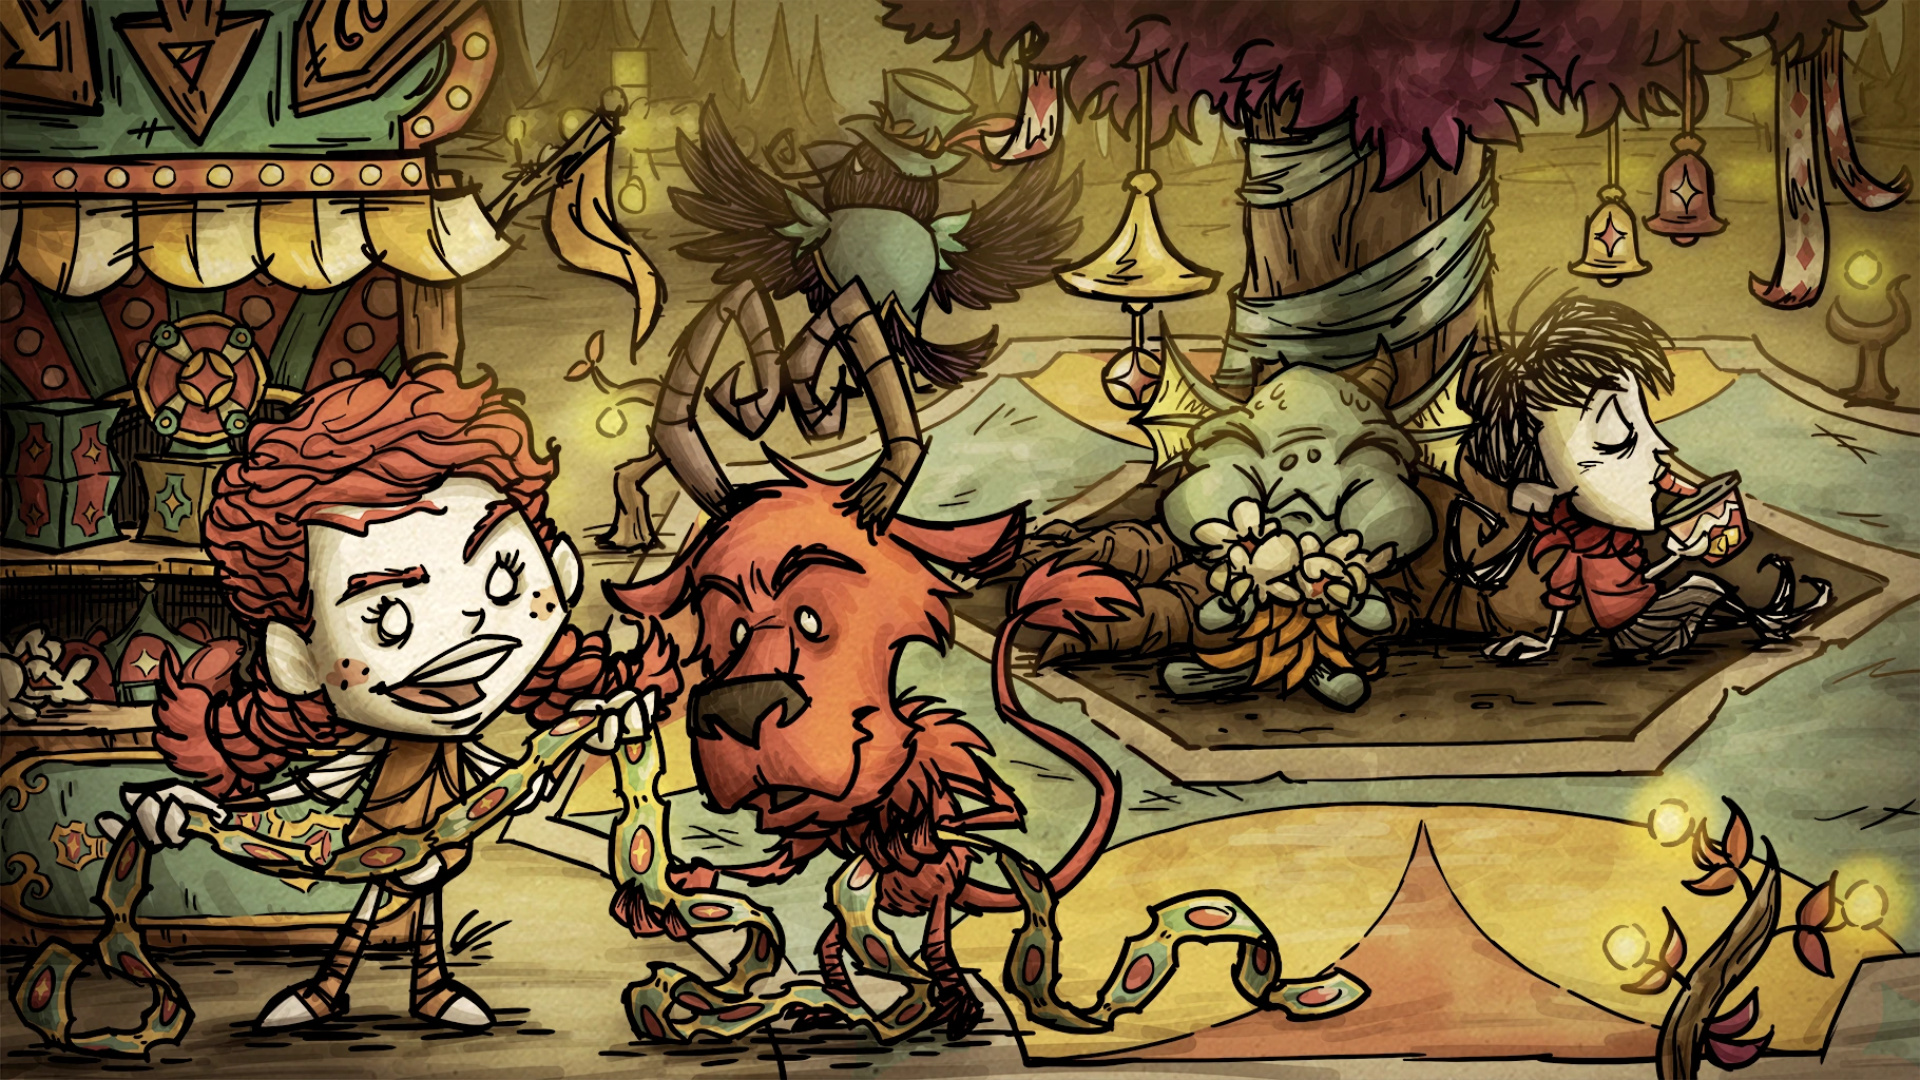 Донт старв длс. Don't Starve игра. Don't Starve together карнавал. Донт старв 3. Don't Starve together игрушки.